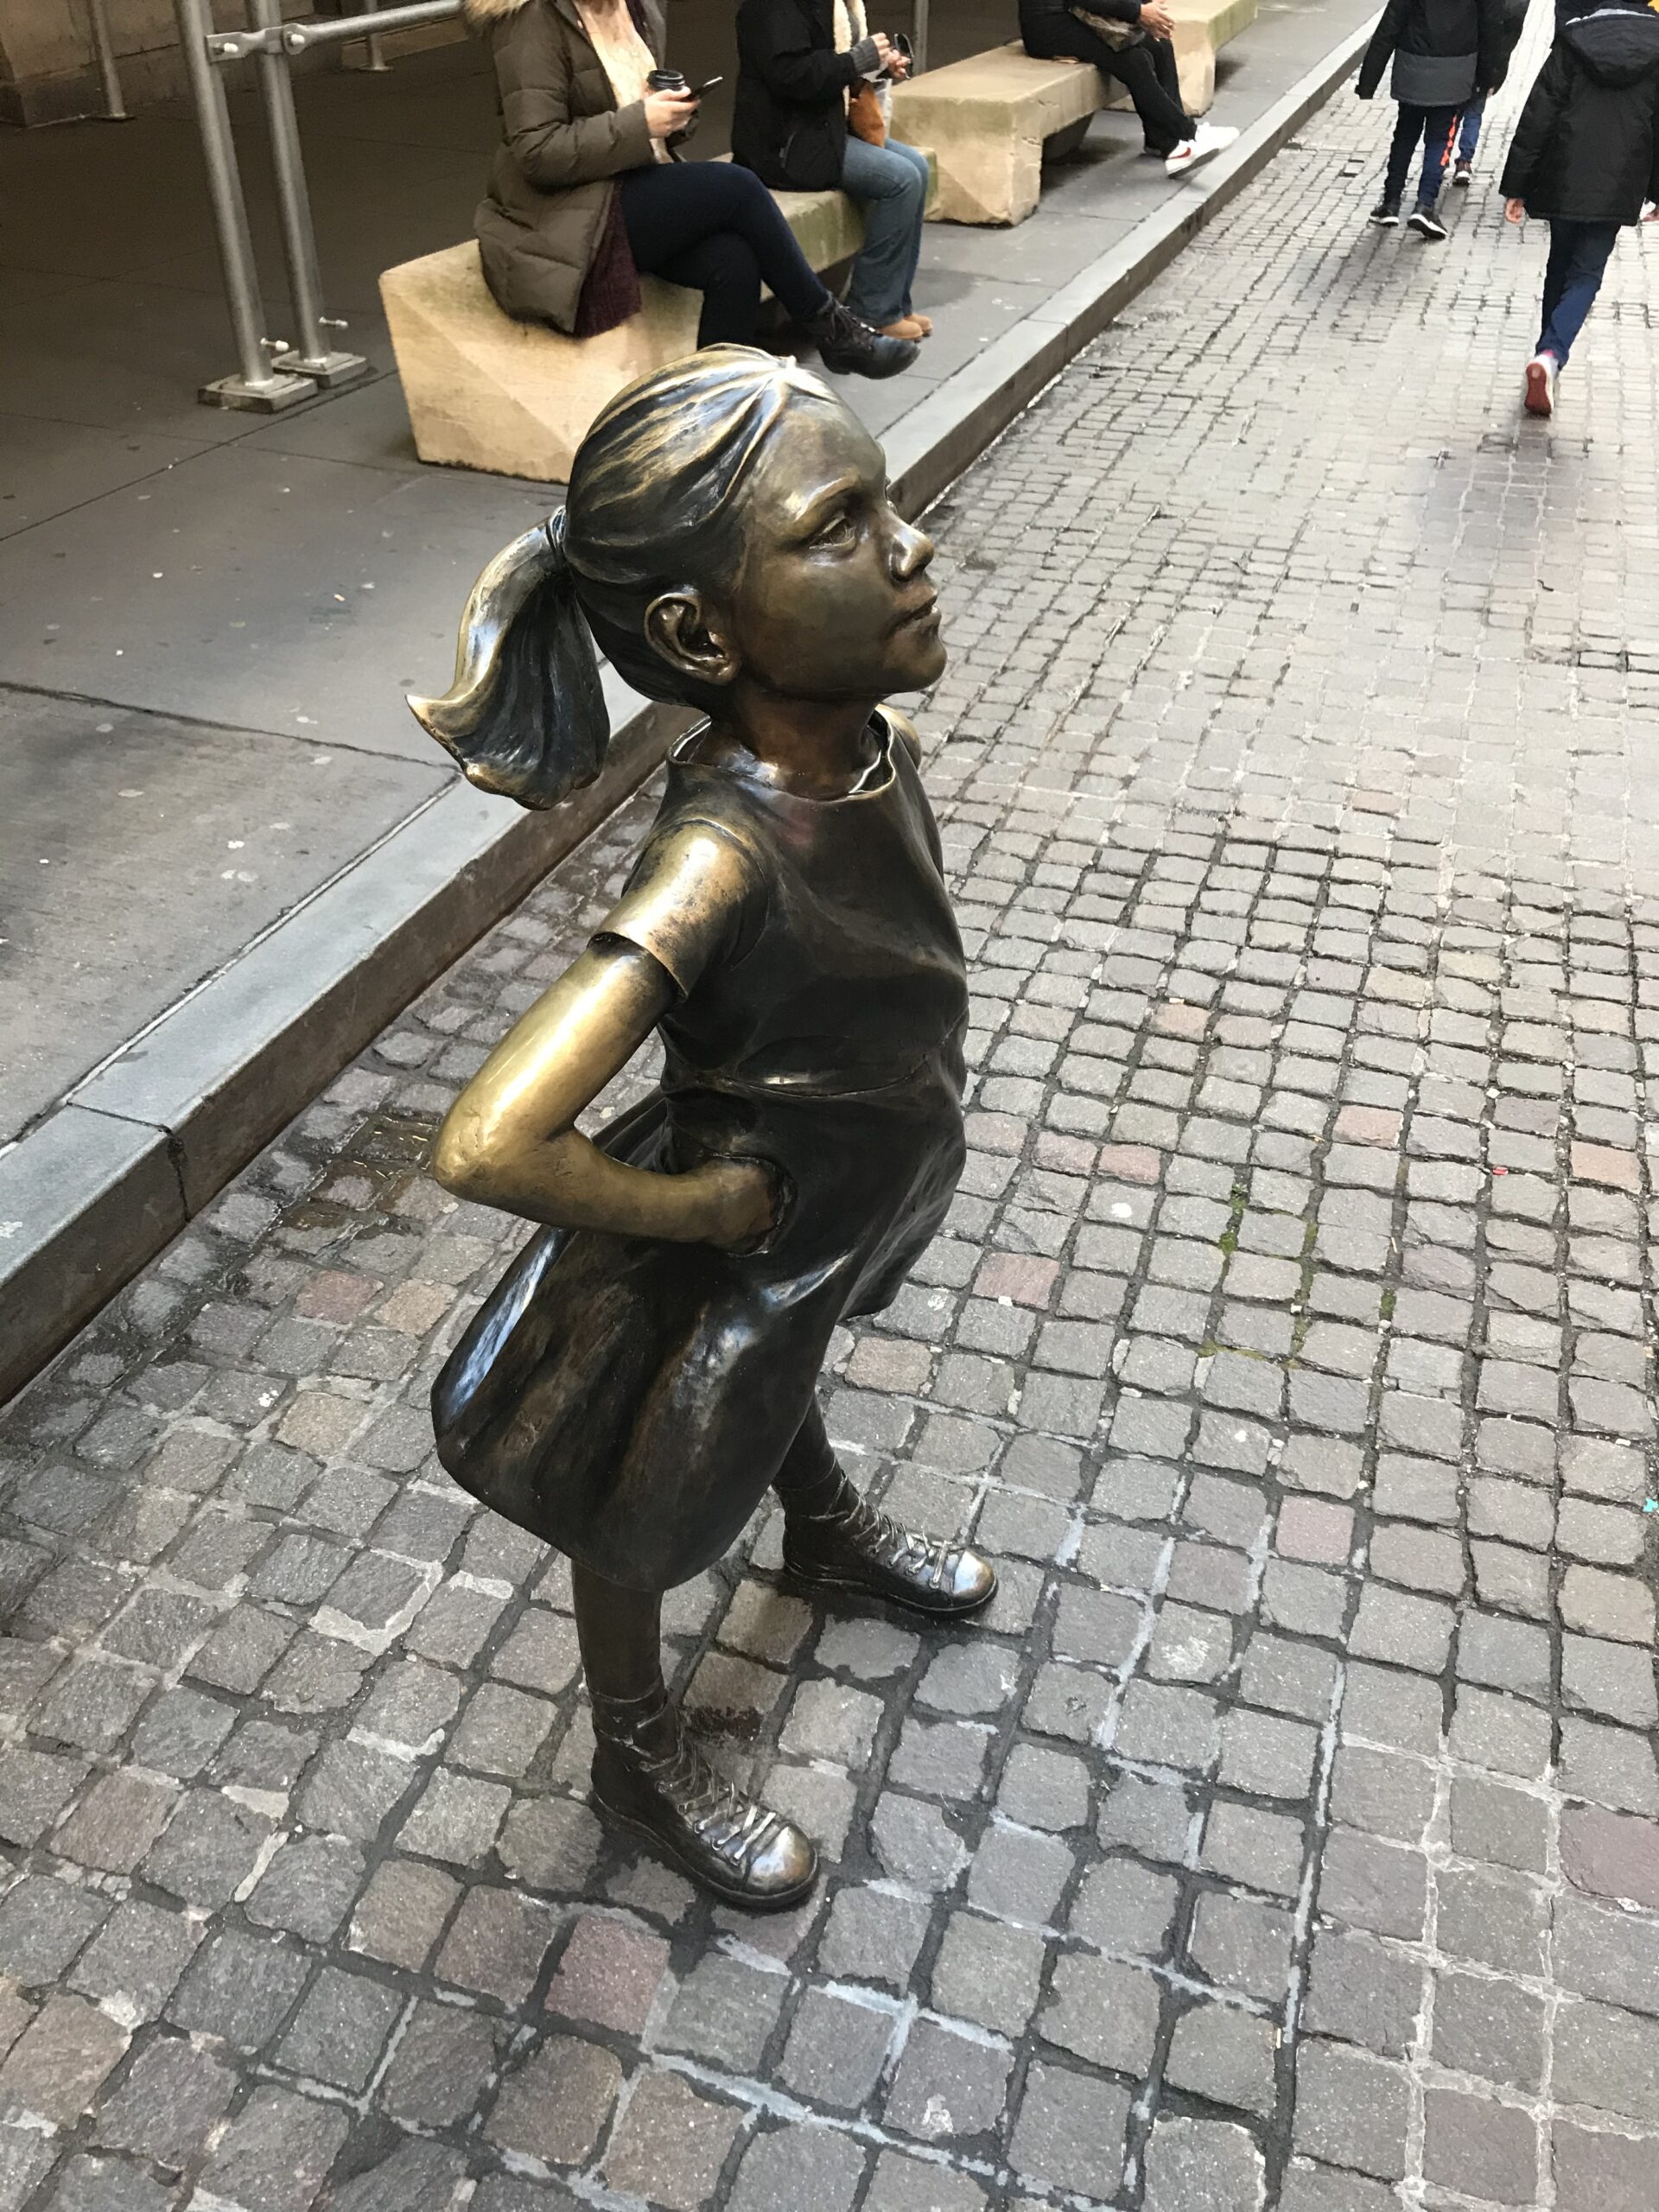 The Fearless Girl